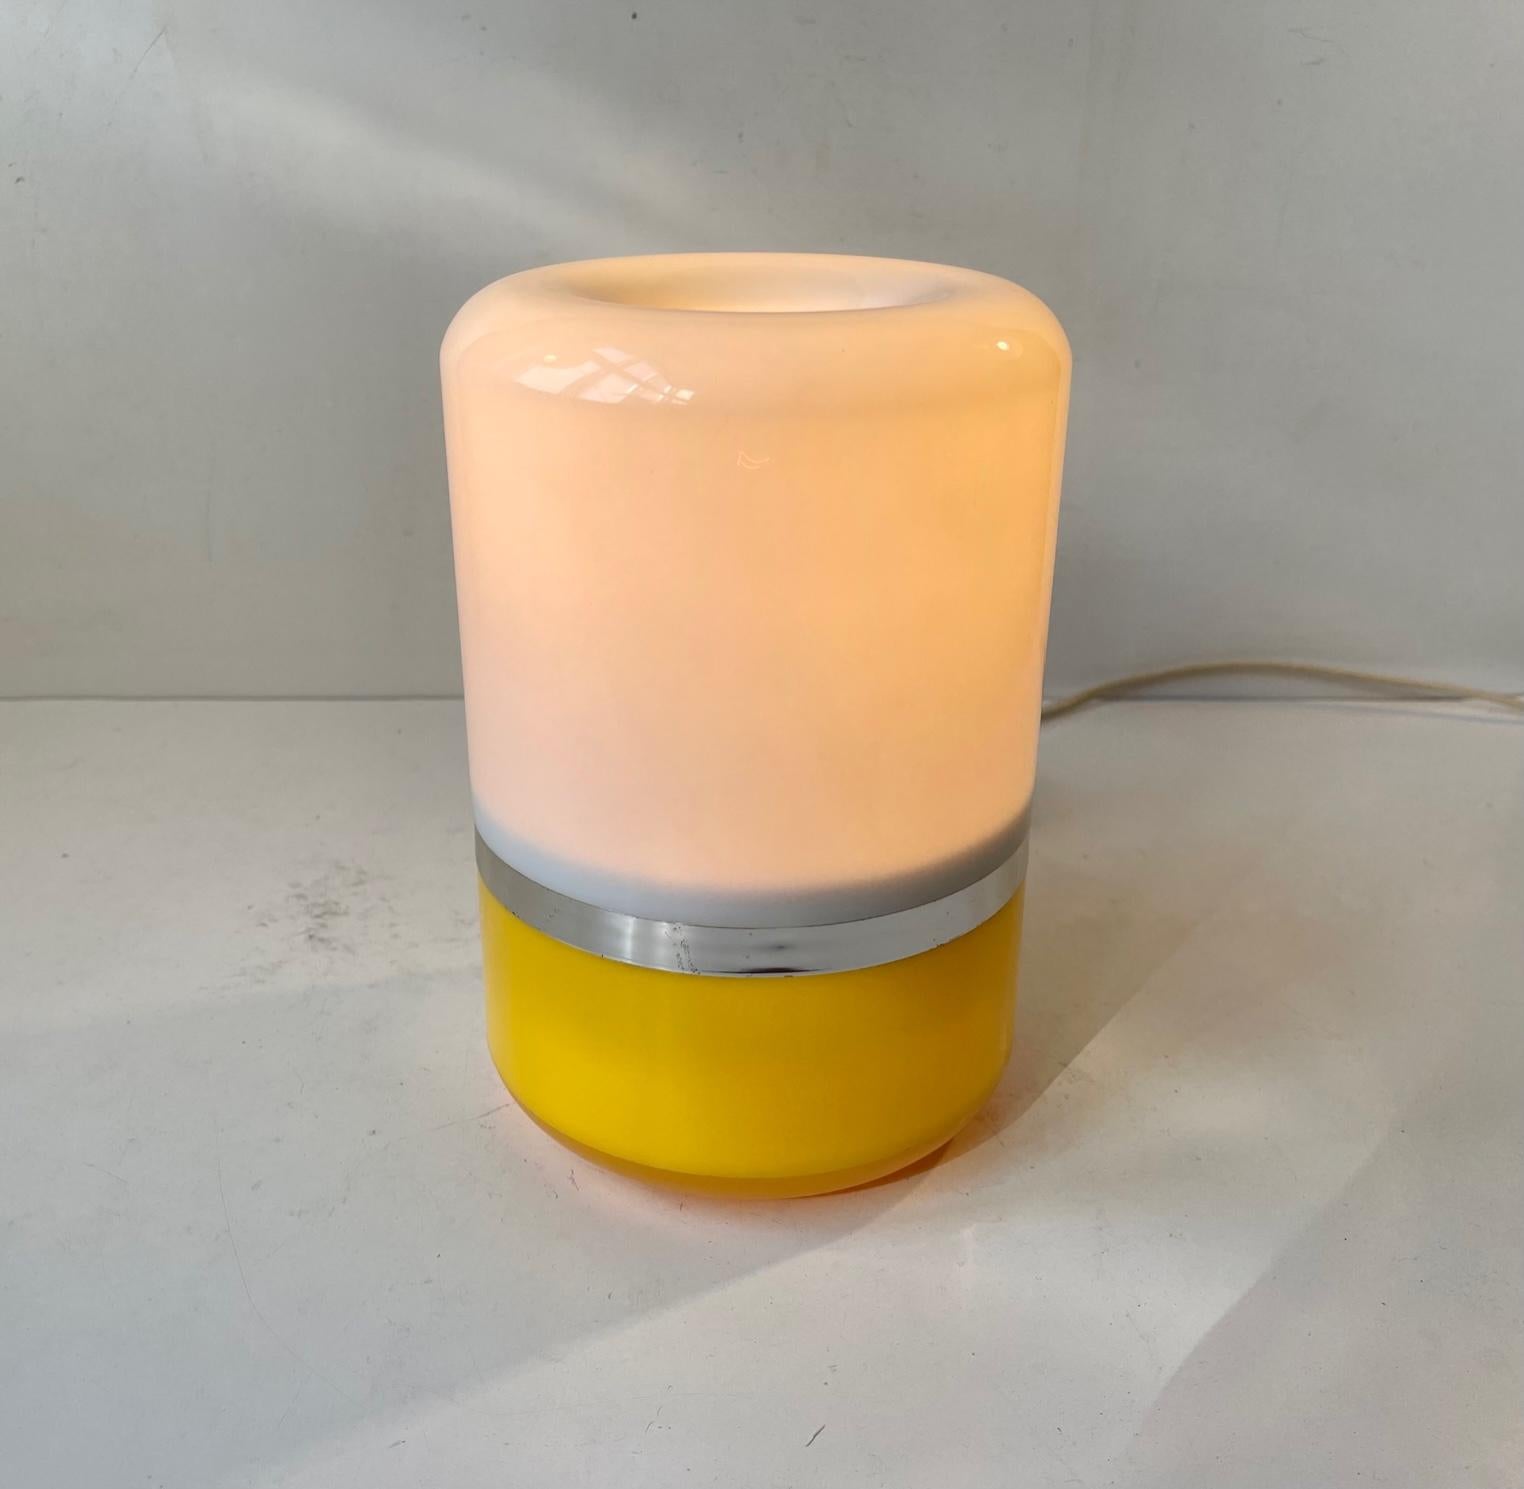 Small organically shaped/rounded table light made from white, yellow and chrome-plated acrylic/plastic. It was made in Italy during the 1970s probably bu Guzzini. Its original socket is E27 compatible and is has an on/off switch to its cord.